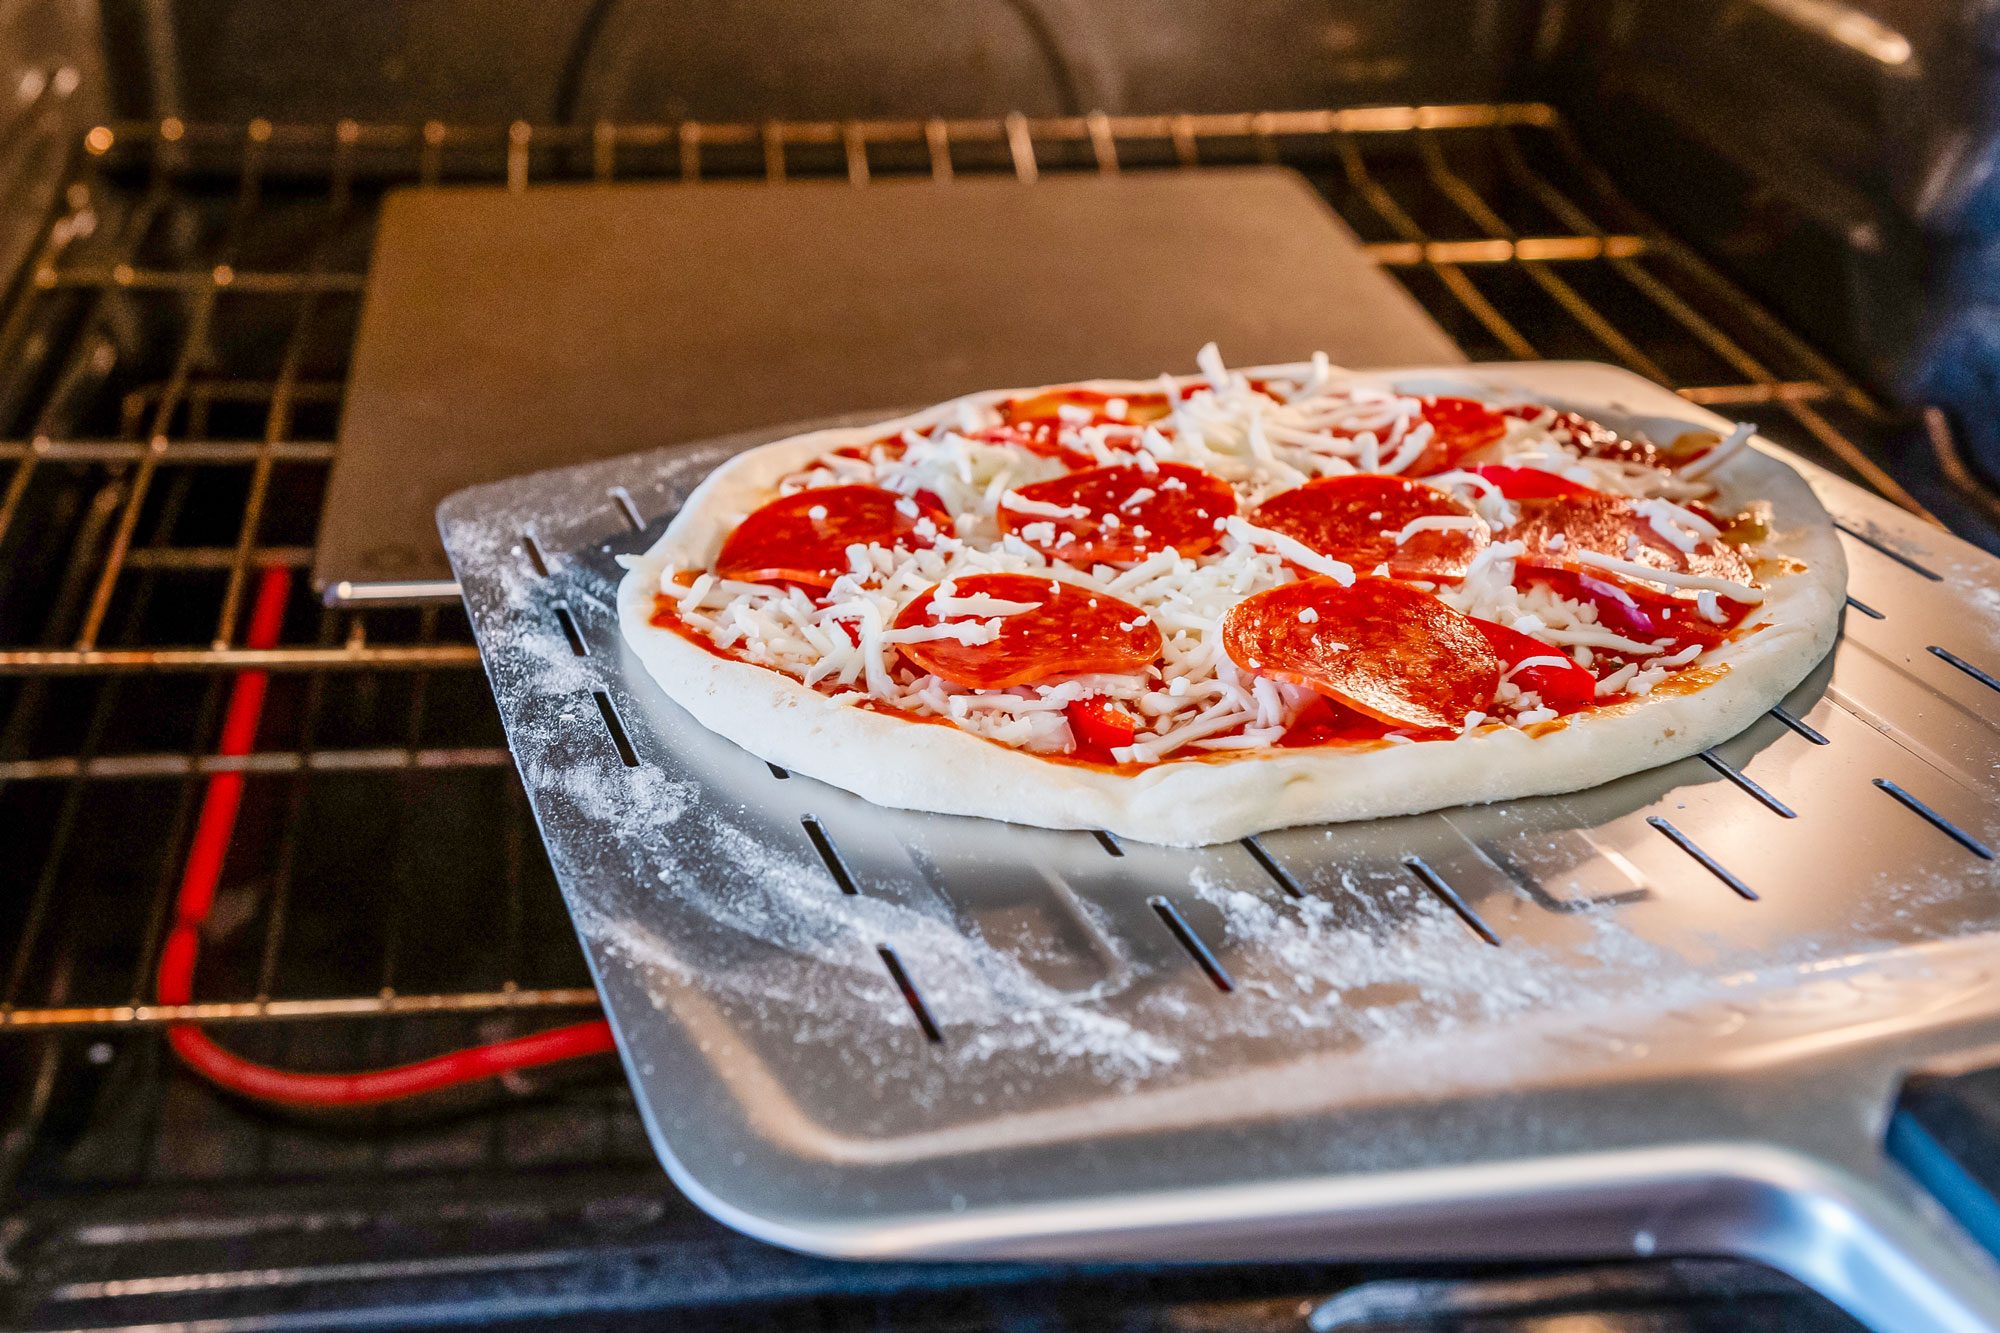 Ooni Pizza Steel Review: Make Homemade Pizzas in Half the Time